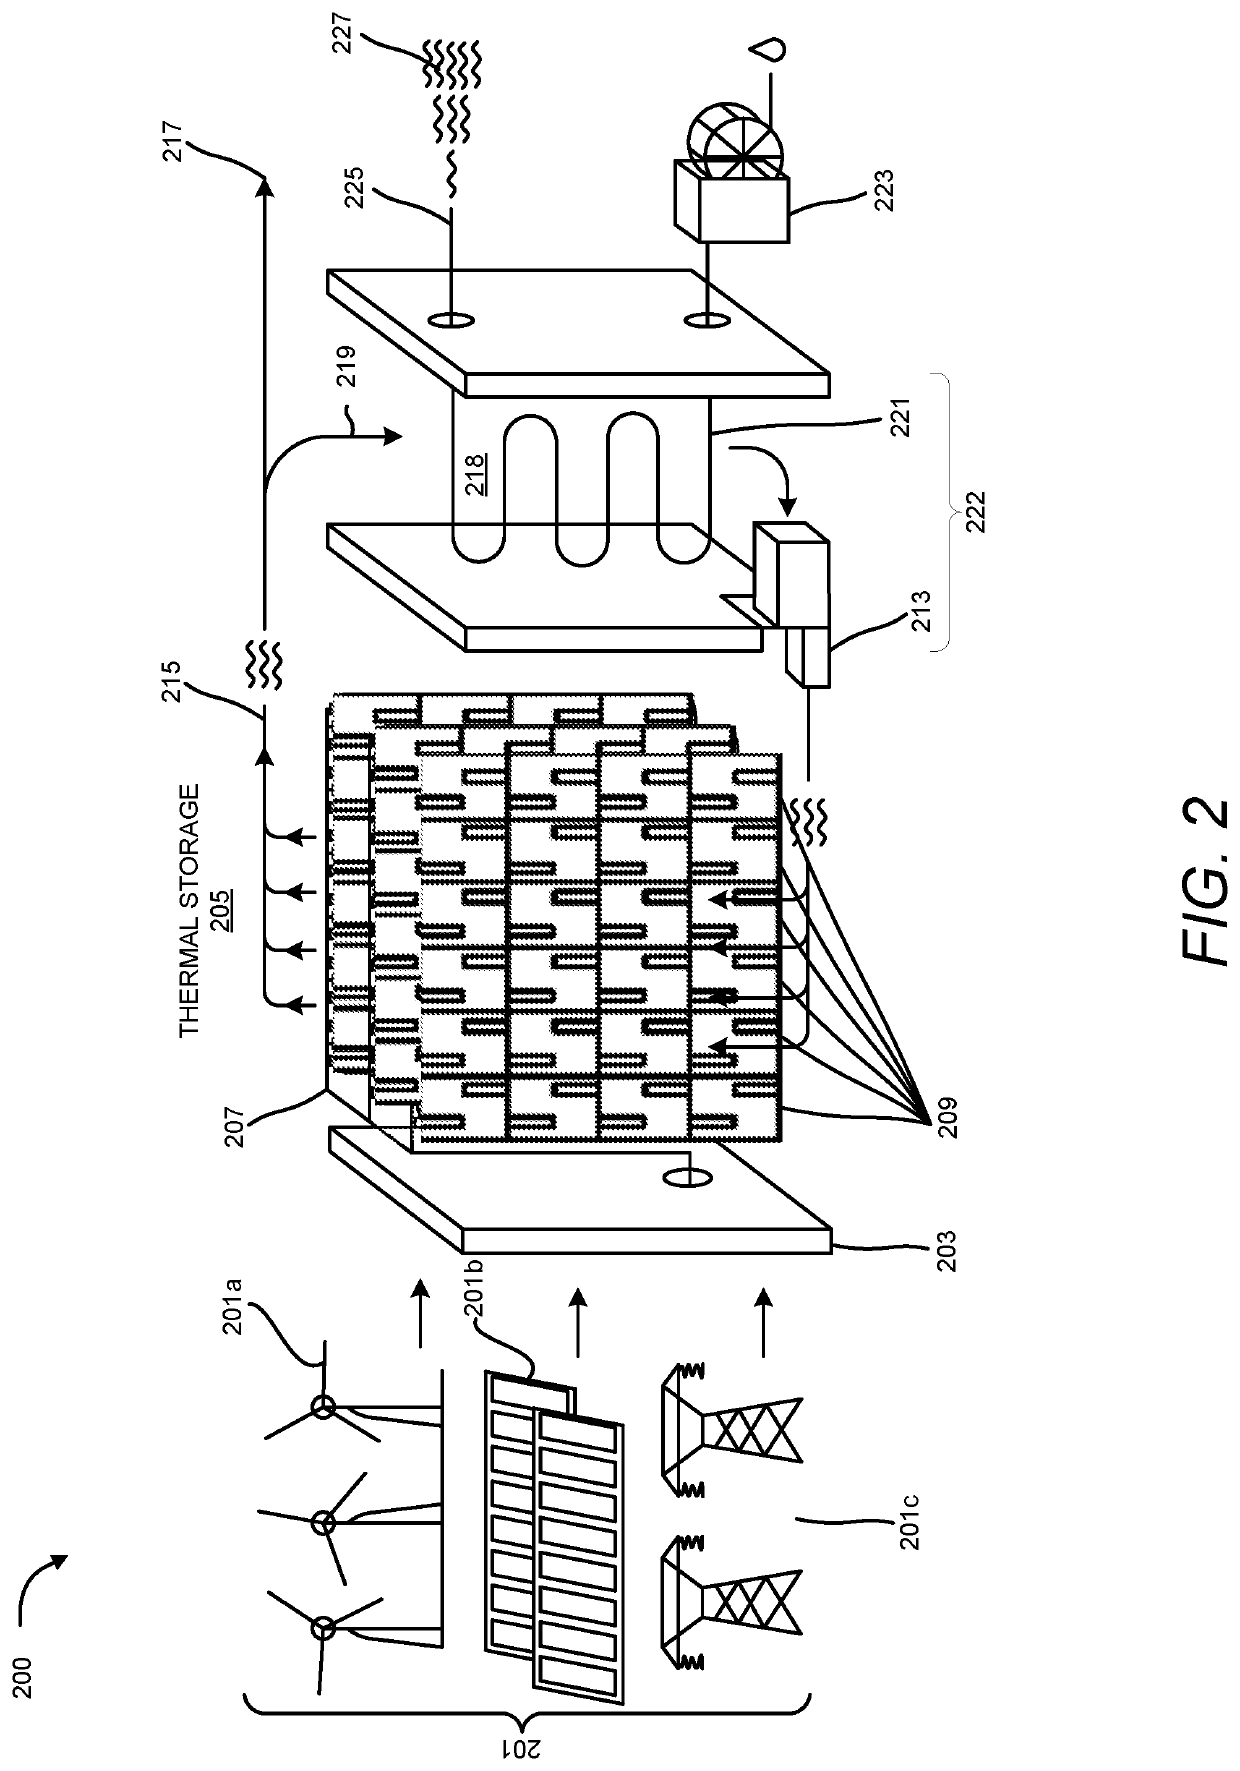 Thermal Energy Storage System with System for Deep Discharge of Thermal Storage Blocks